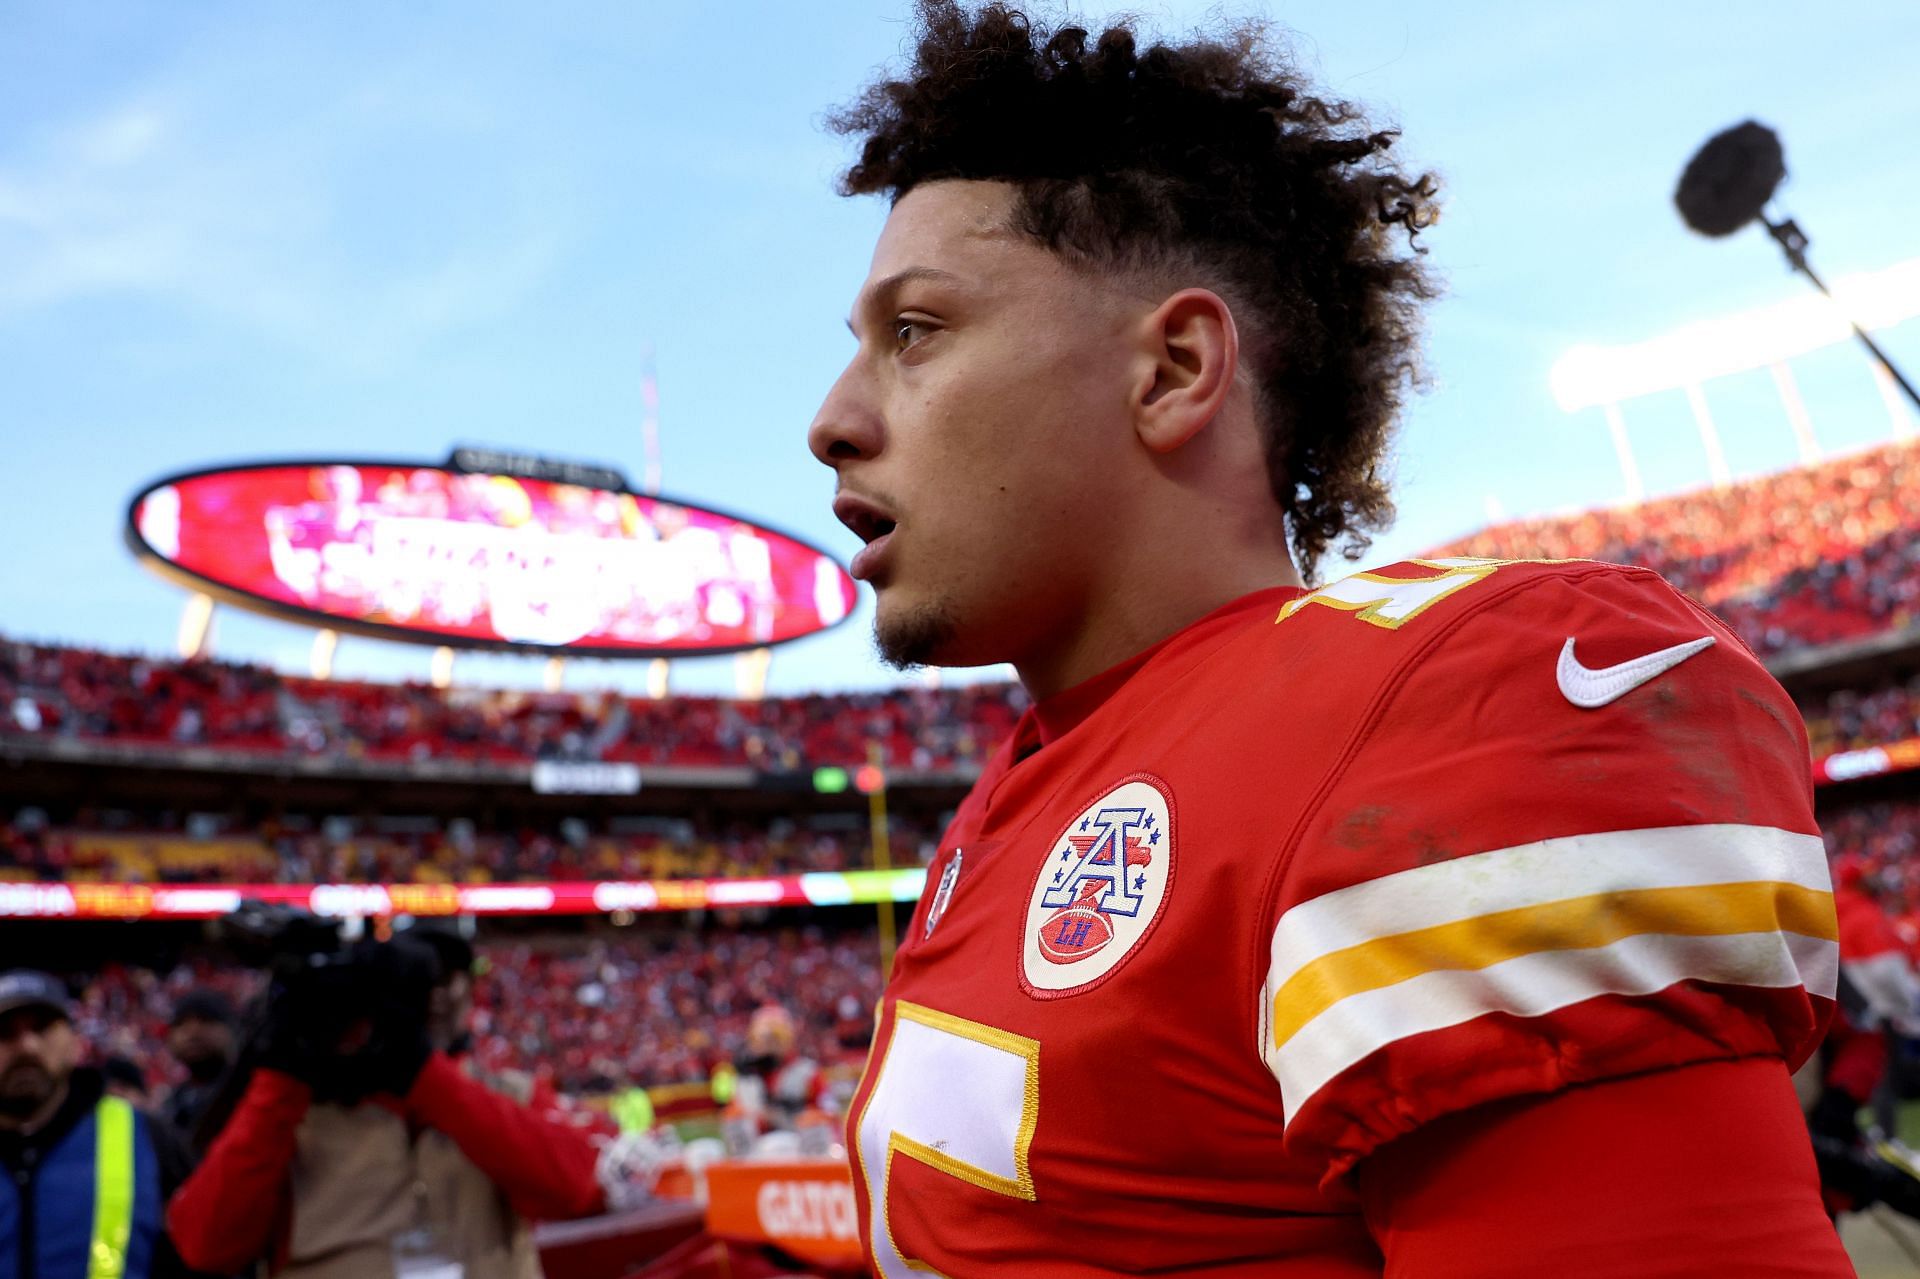 The Chiefs quarterback has been lauded for sponsoring the All-Star game